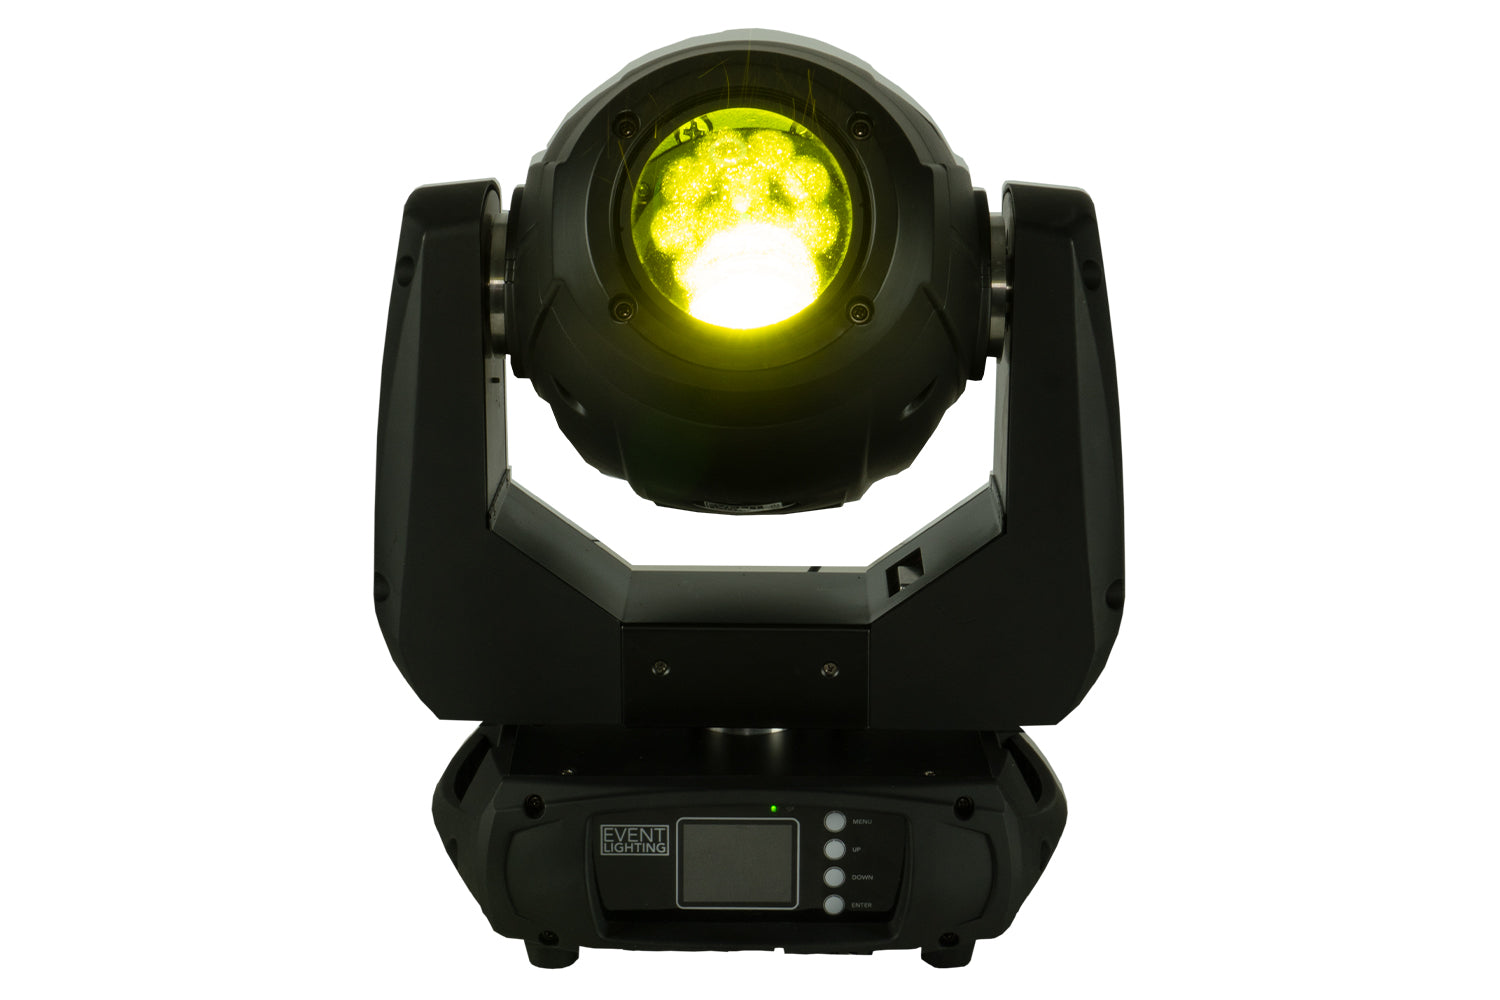 Event Lighting Lite LM250 Moving Head, front, yellow